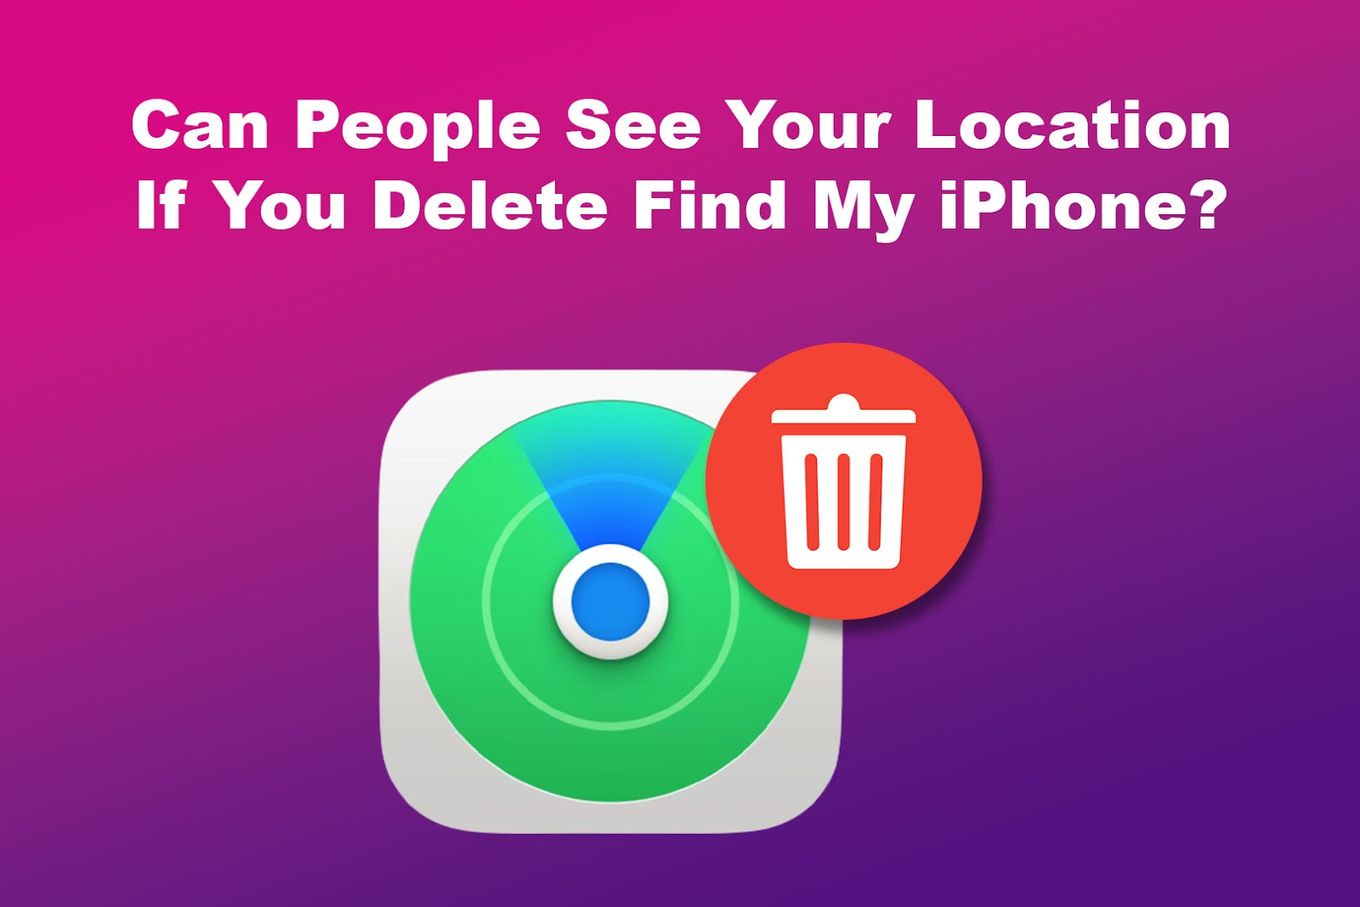 Can People See Your Location If You Delete Find My iPhone?